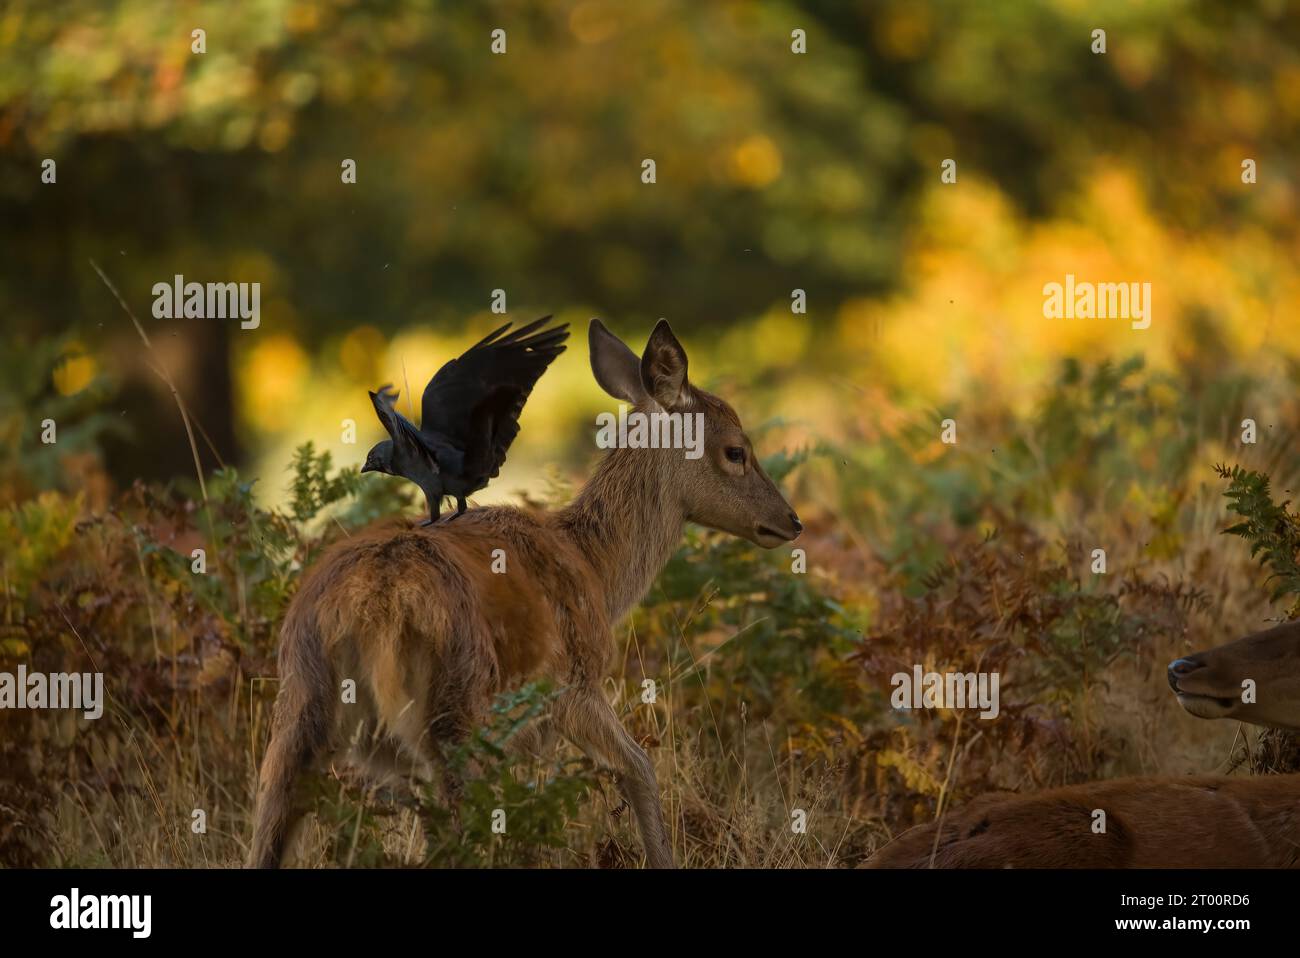 Crow and a deer playing together MIDDLESEX ENDEARING images show a crow using the head of an adorable red deer like a lookout post.    These pictures, Stock Photo